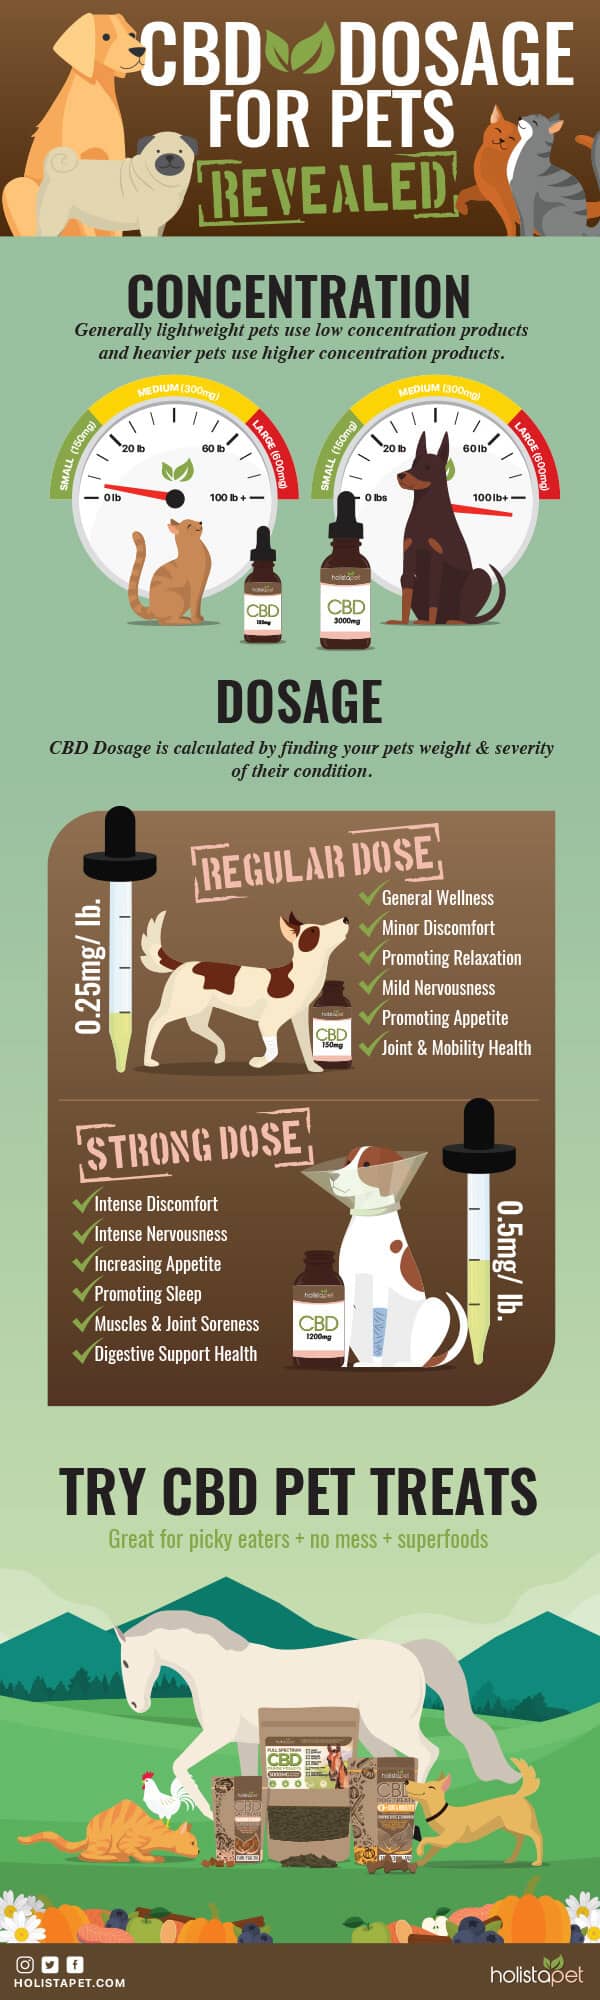 Here is a guide to proper CBD dosage for pets